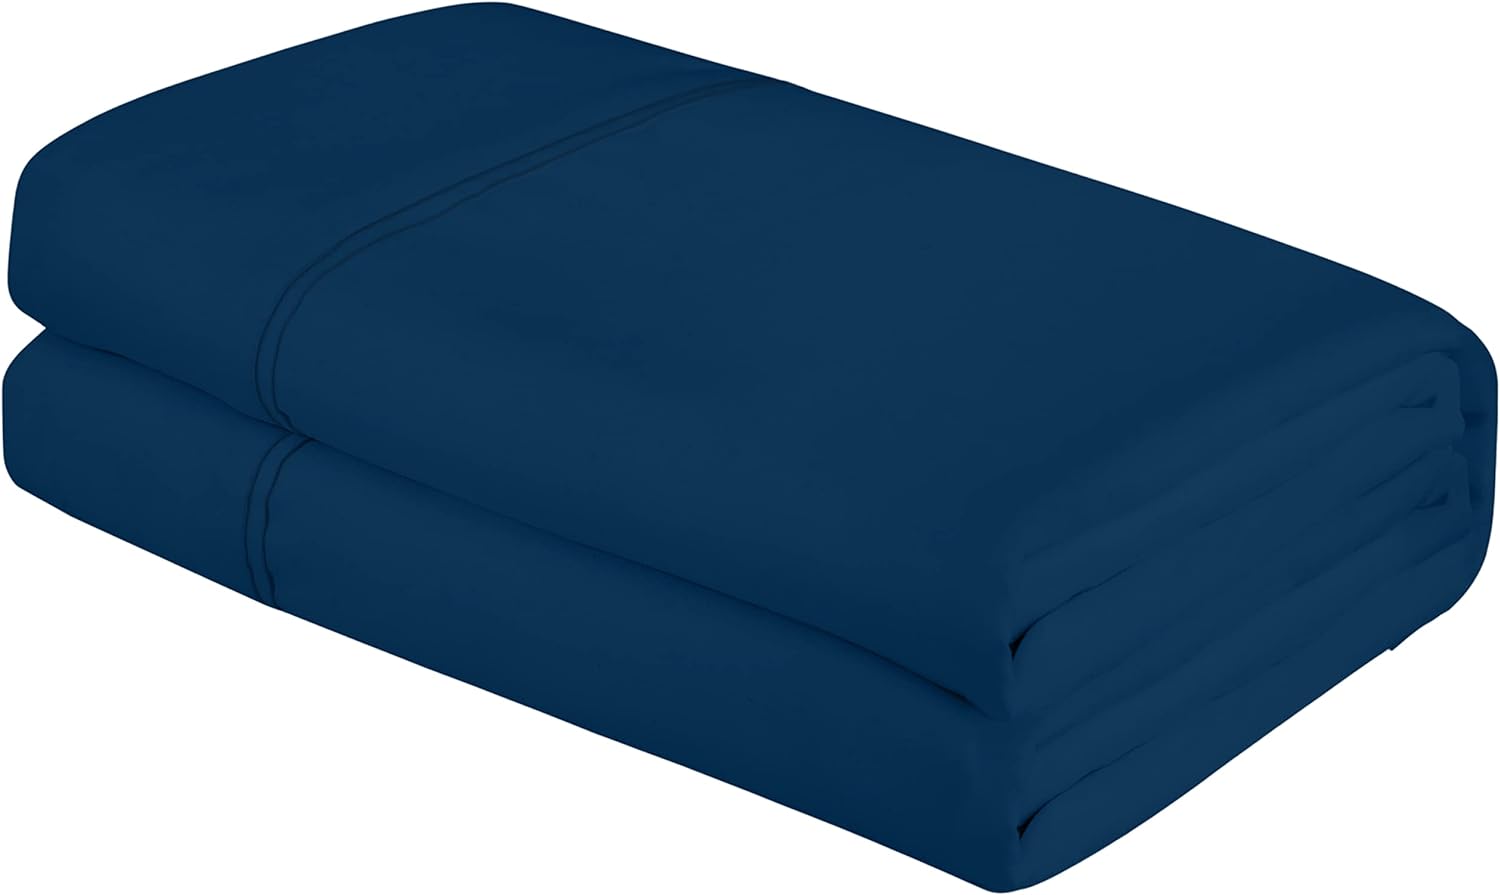 Royale Linens Queen Size Flat Sheet Only - Brushed 1800 Microfiber - Ultra Soft & Breathable - Wrinkle & Stain Resistant - Hotel Quality Flat Sheet Sold Separately - Top Sheet for Bed - (Queen, Navy)